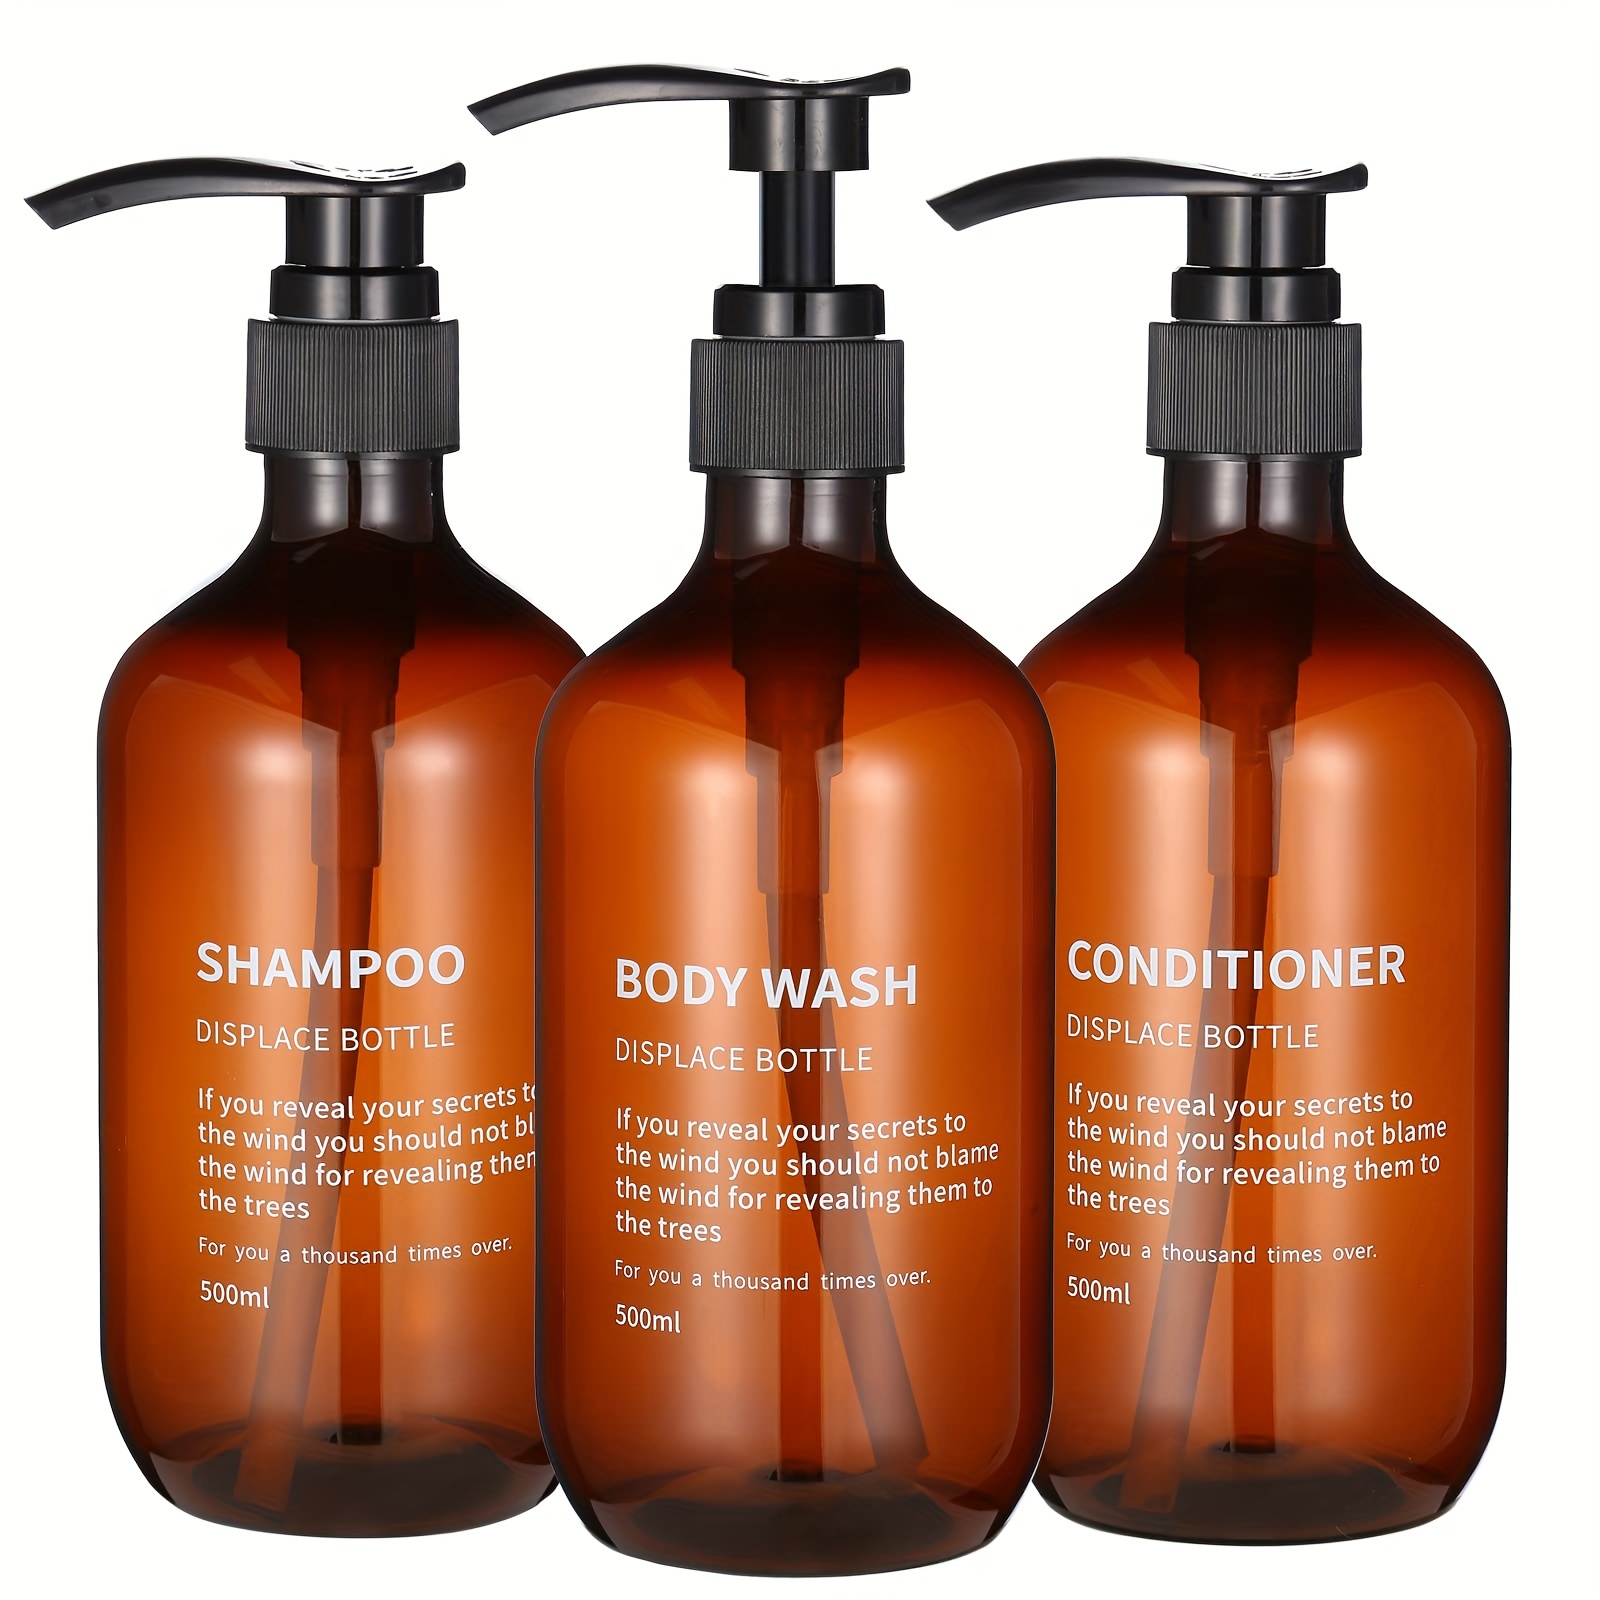 

3 Pack 500ml/16 Oz Waterproof Shampoo And Conditioner Dispenser Set With Reusable Pump Bottles For Bathroom - Amber Color With Printed Label - Perfect For Shower Soap, Body Wash, And Hair Care